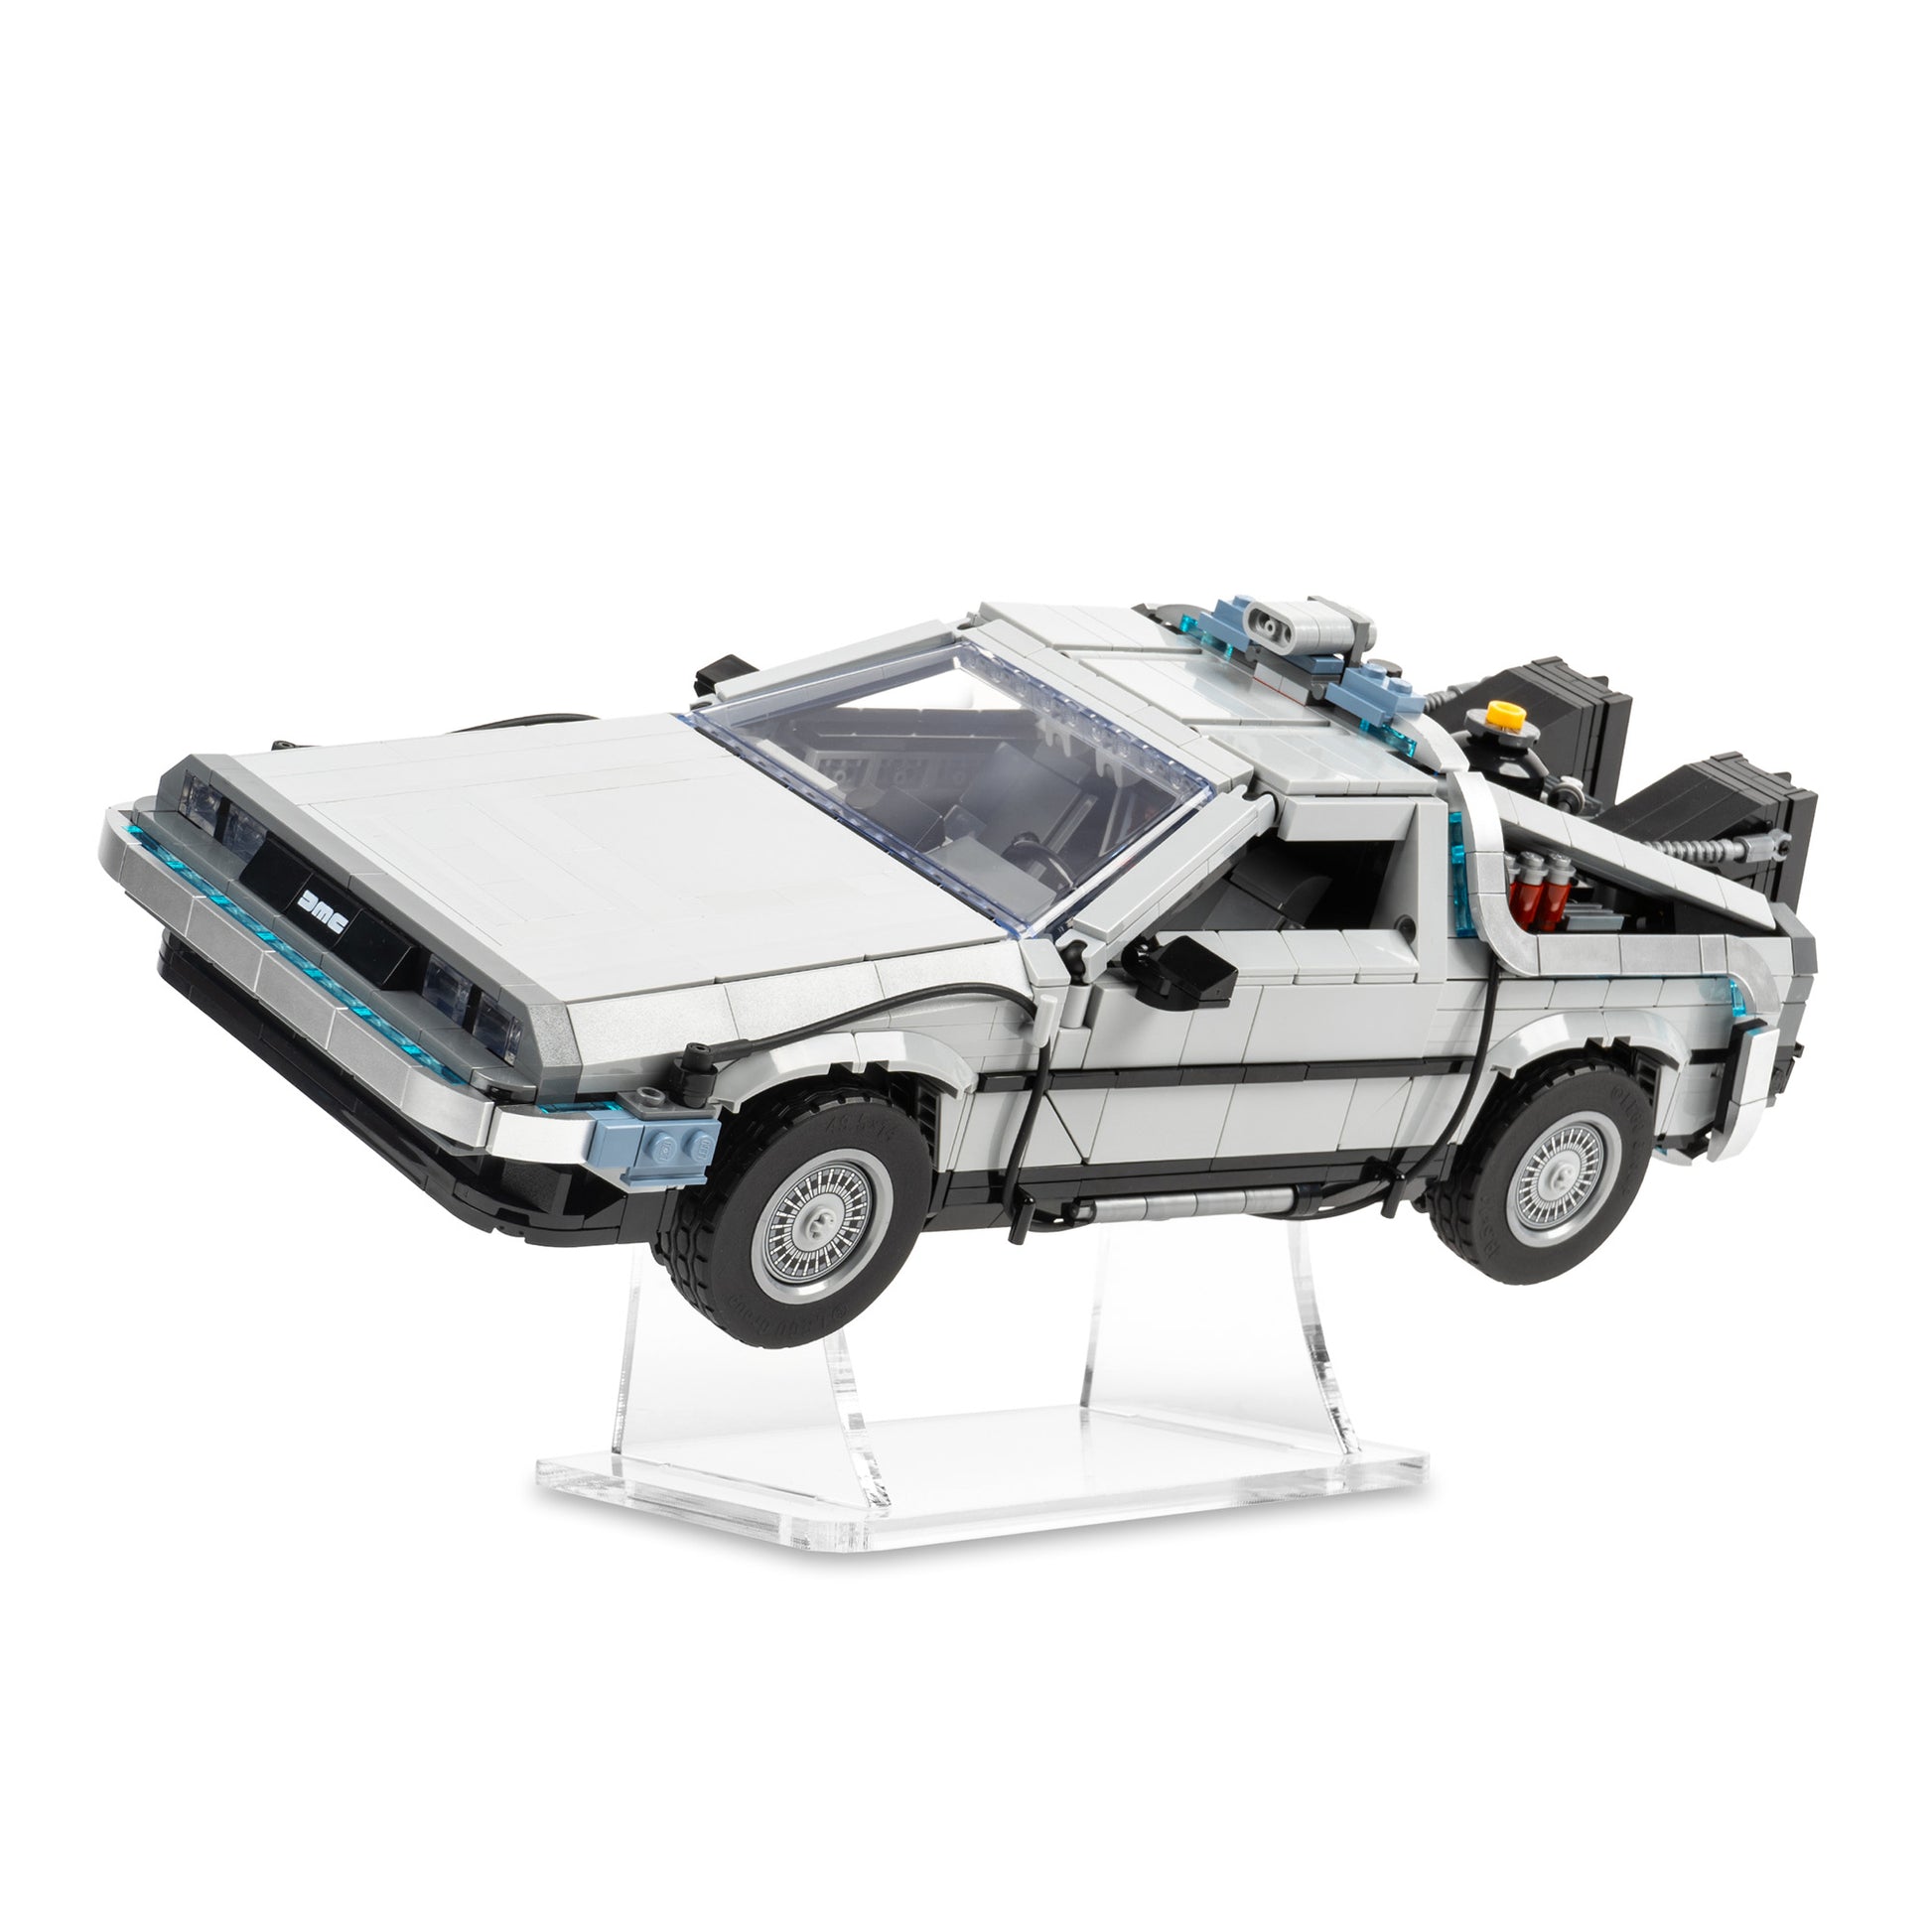 Lego's Back to the Future DeLorean set 2022: How to buy the 10300 model now